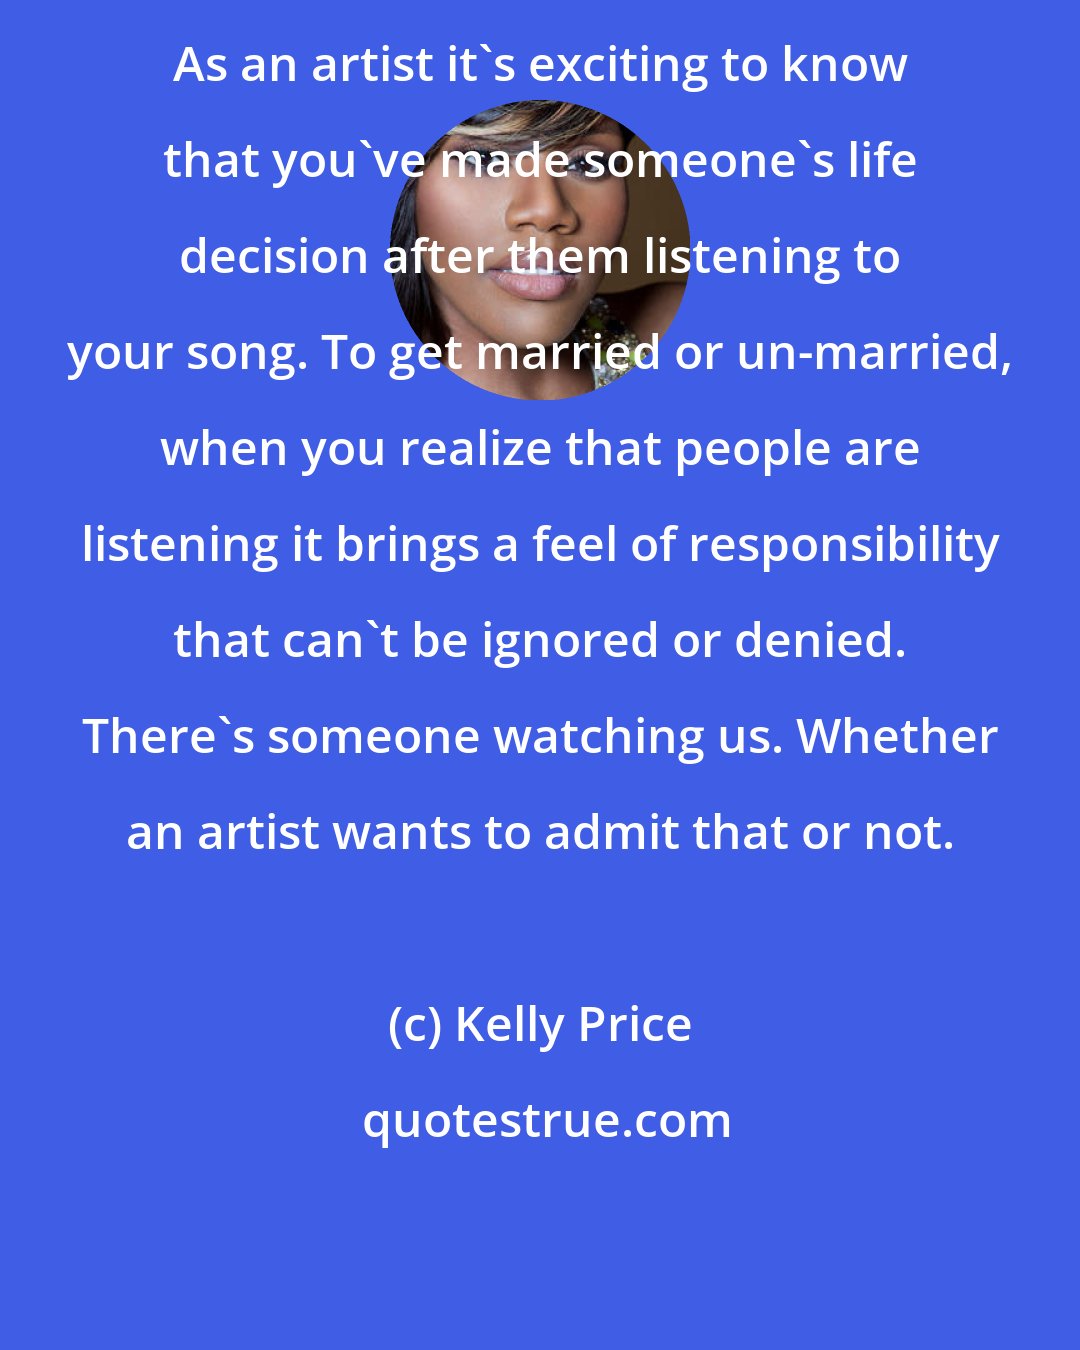 Kelly Price: As an artist it's exciting to know that you've made someone's life decision after them listening to your song. To get married or un-married, when you realize that people are listening it brings a feel of responsibility that can't be ignored or denied. There's someone watching us. Whether an artist wants to admit that or not.